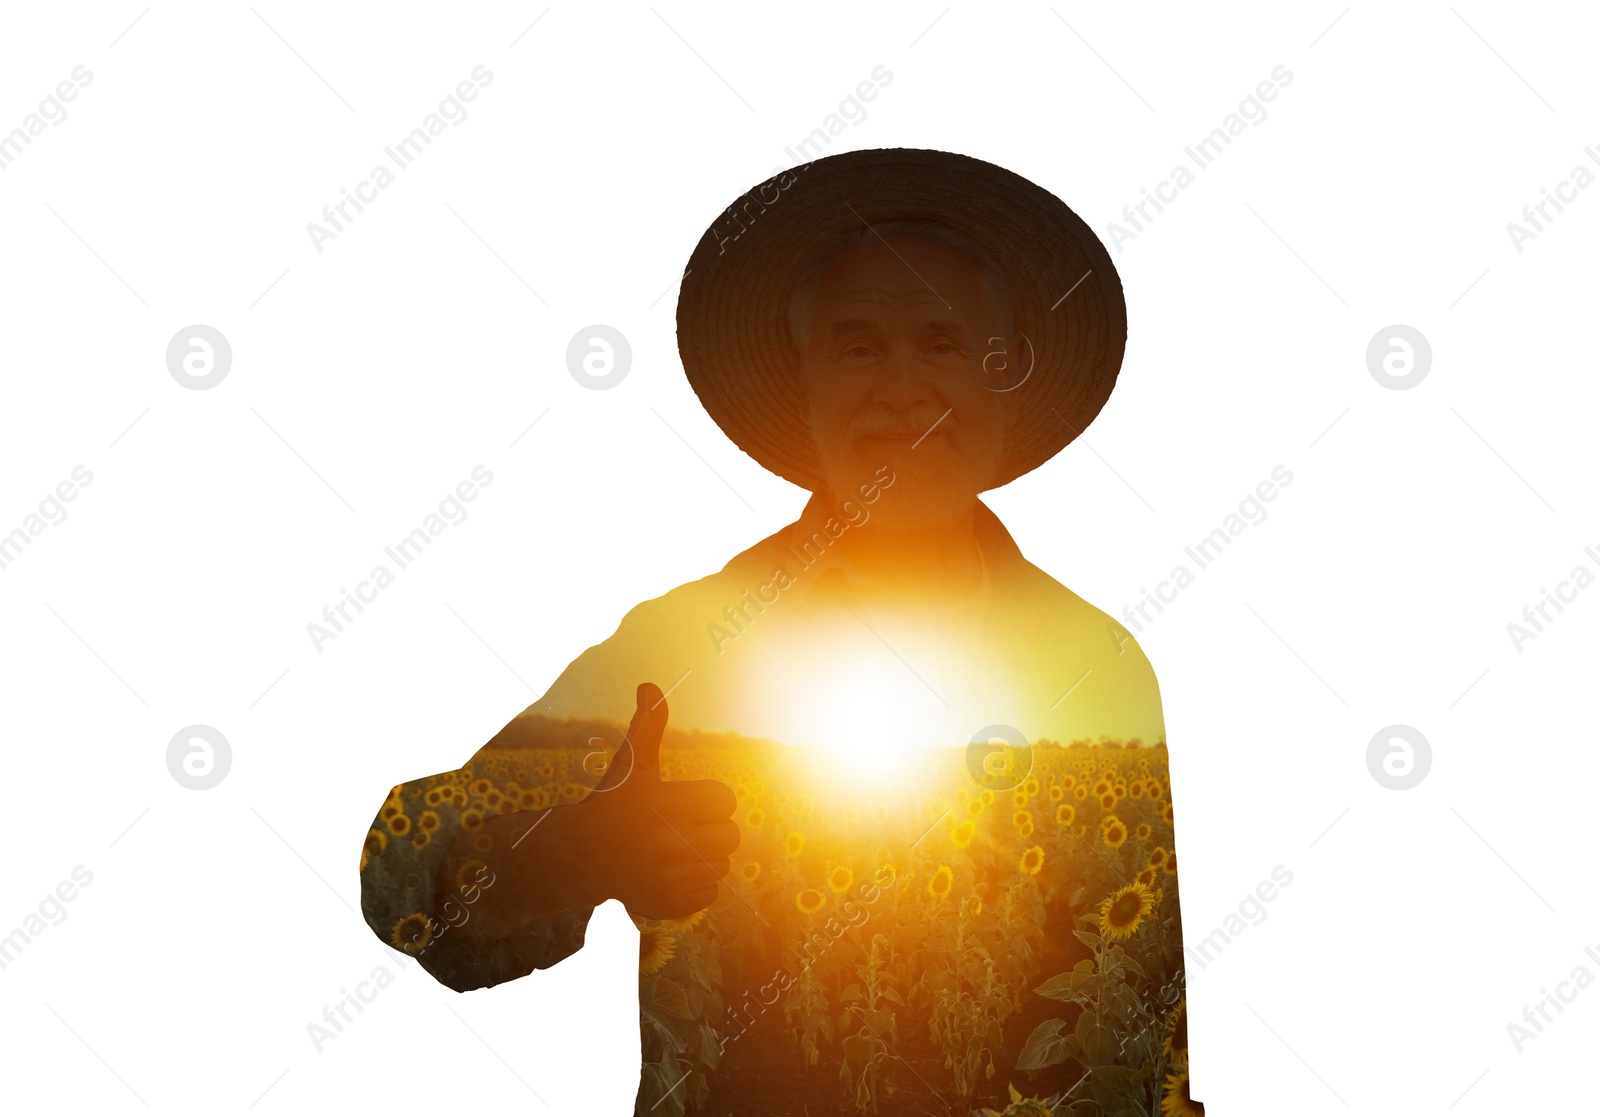 Image of Double exposure of farmer and sunflower field on white background